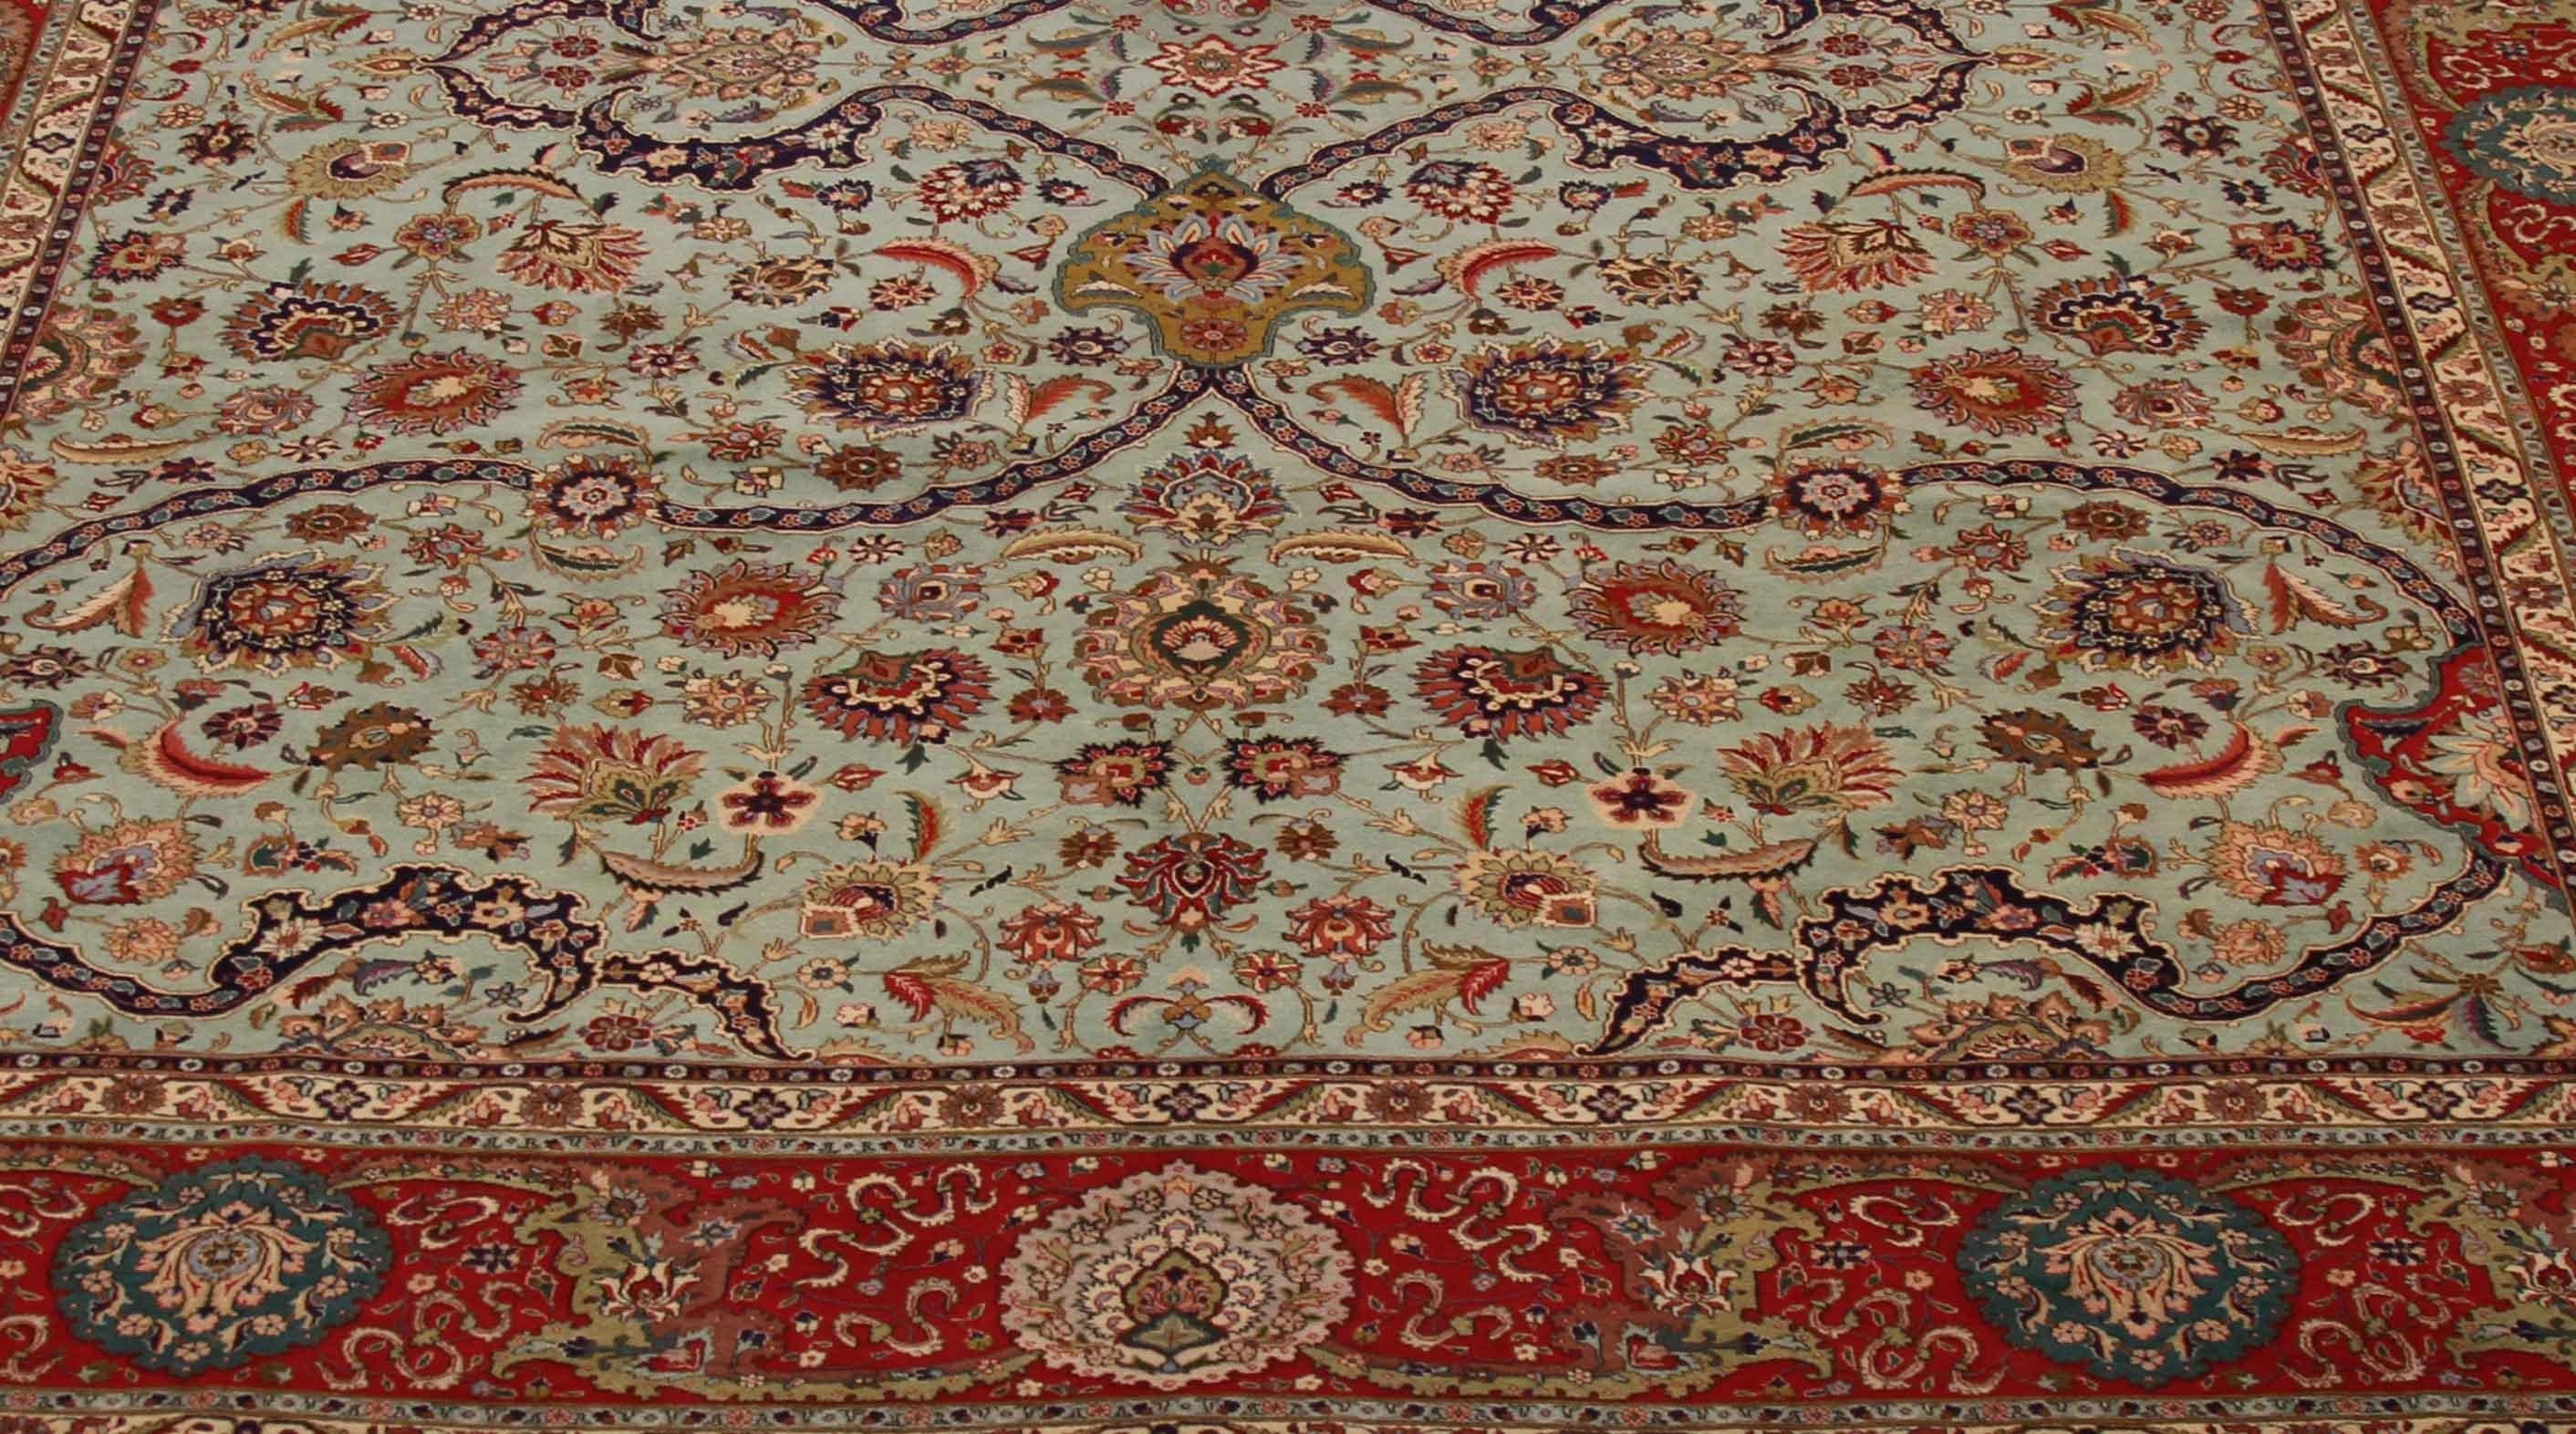 1970s Antique Tabriz Persian Rug with a Grand Blue and Red Floral Design In Excellent Condition For Sale In Dallas, TX